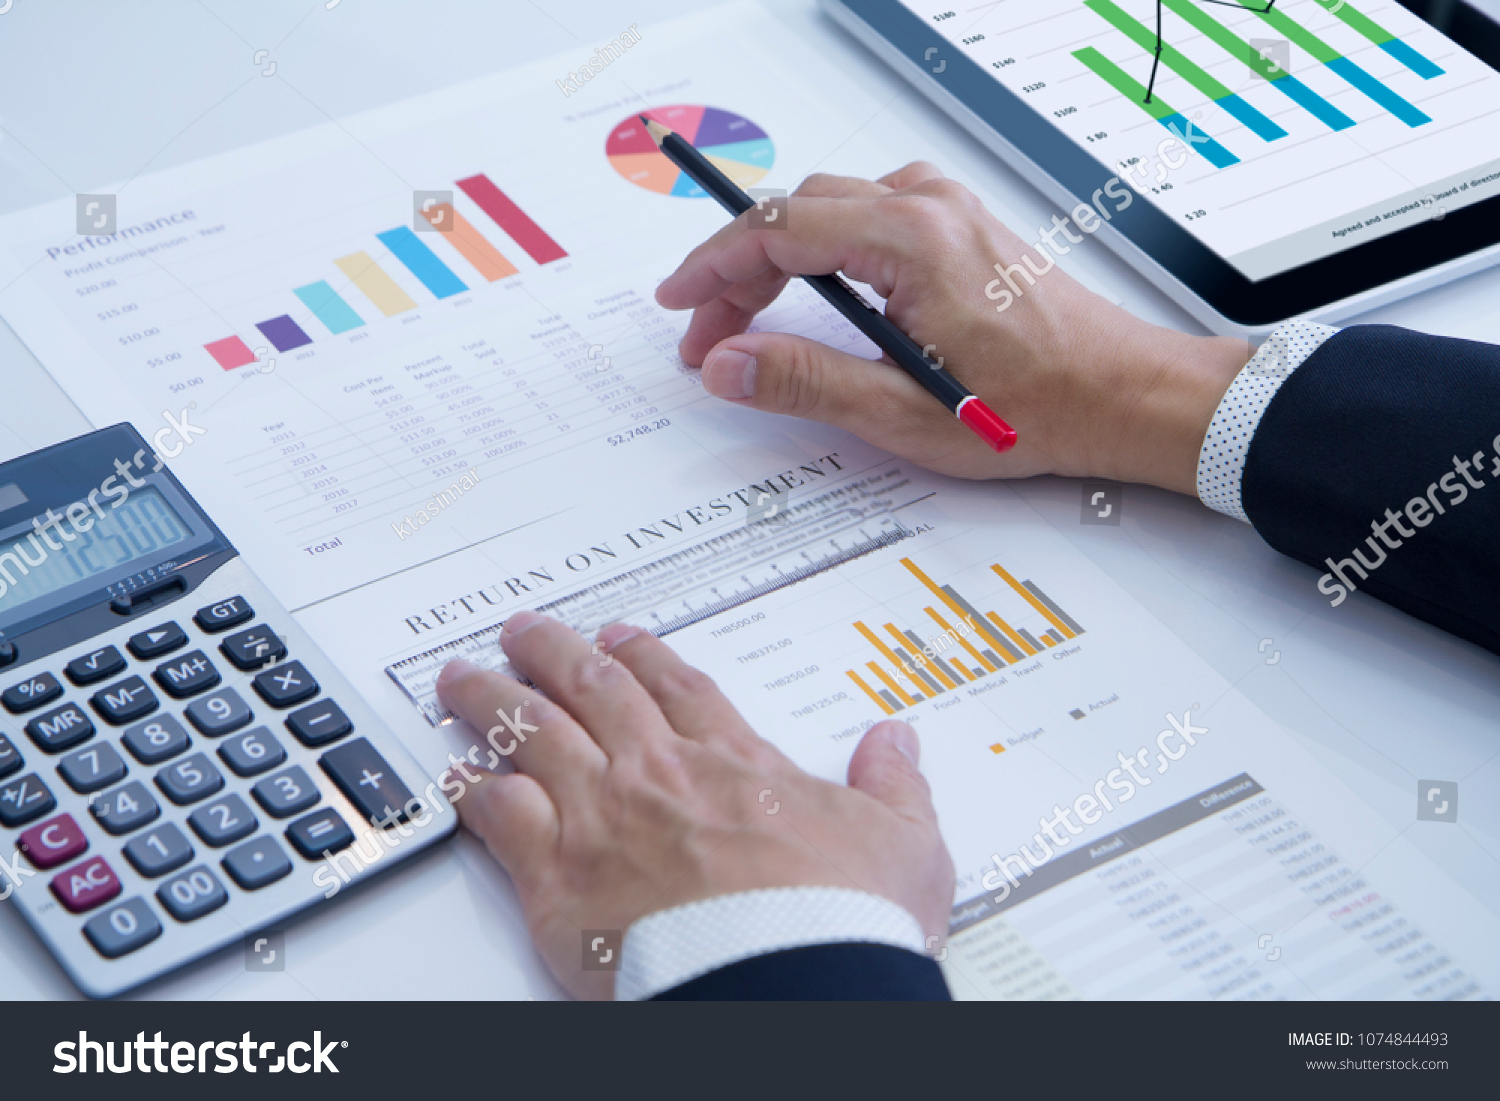 Businessman is deeply reviewing a financial report for a return on investment or investment risk analysis. #1074844493